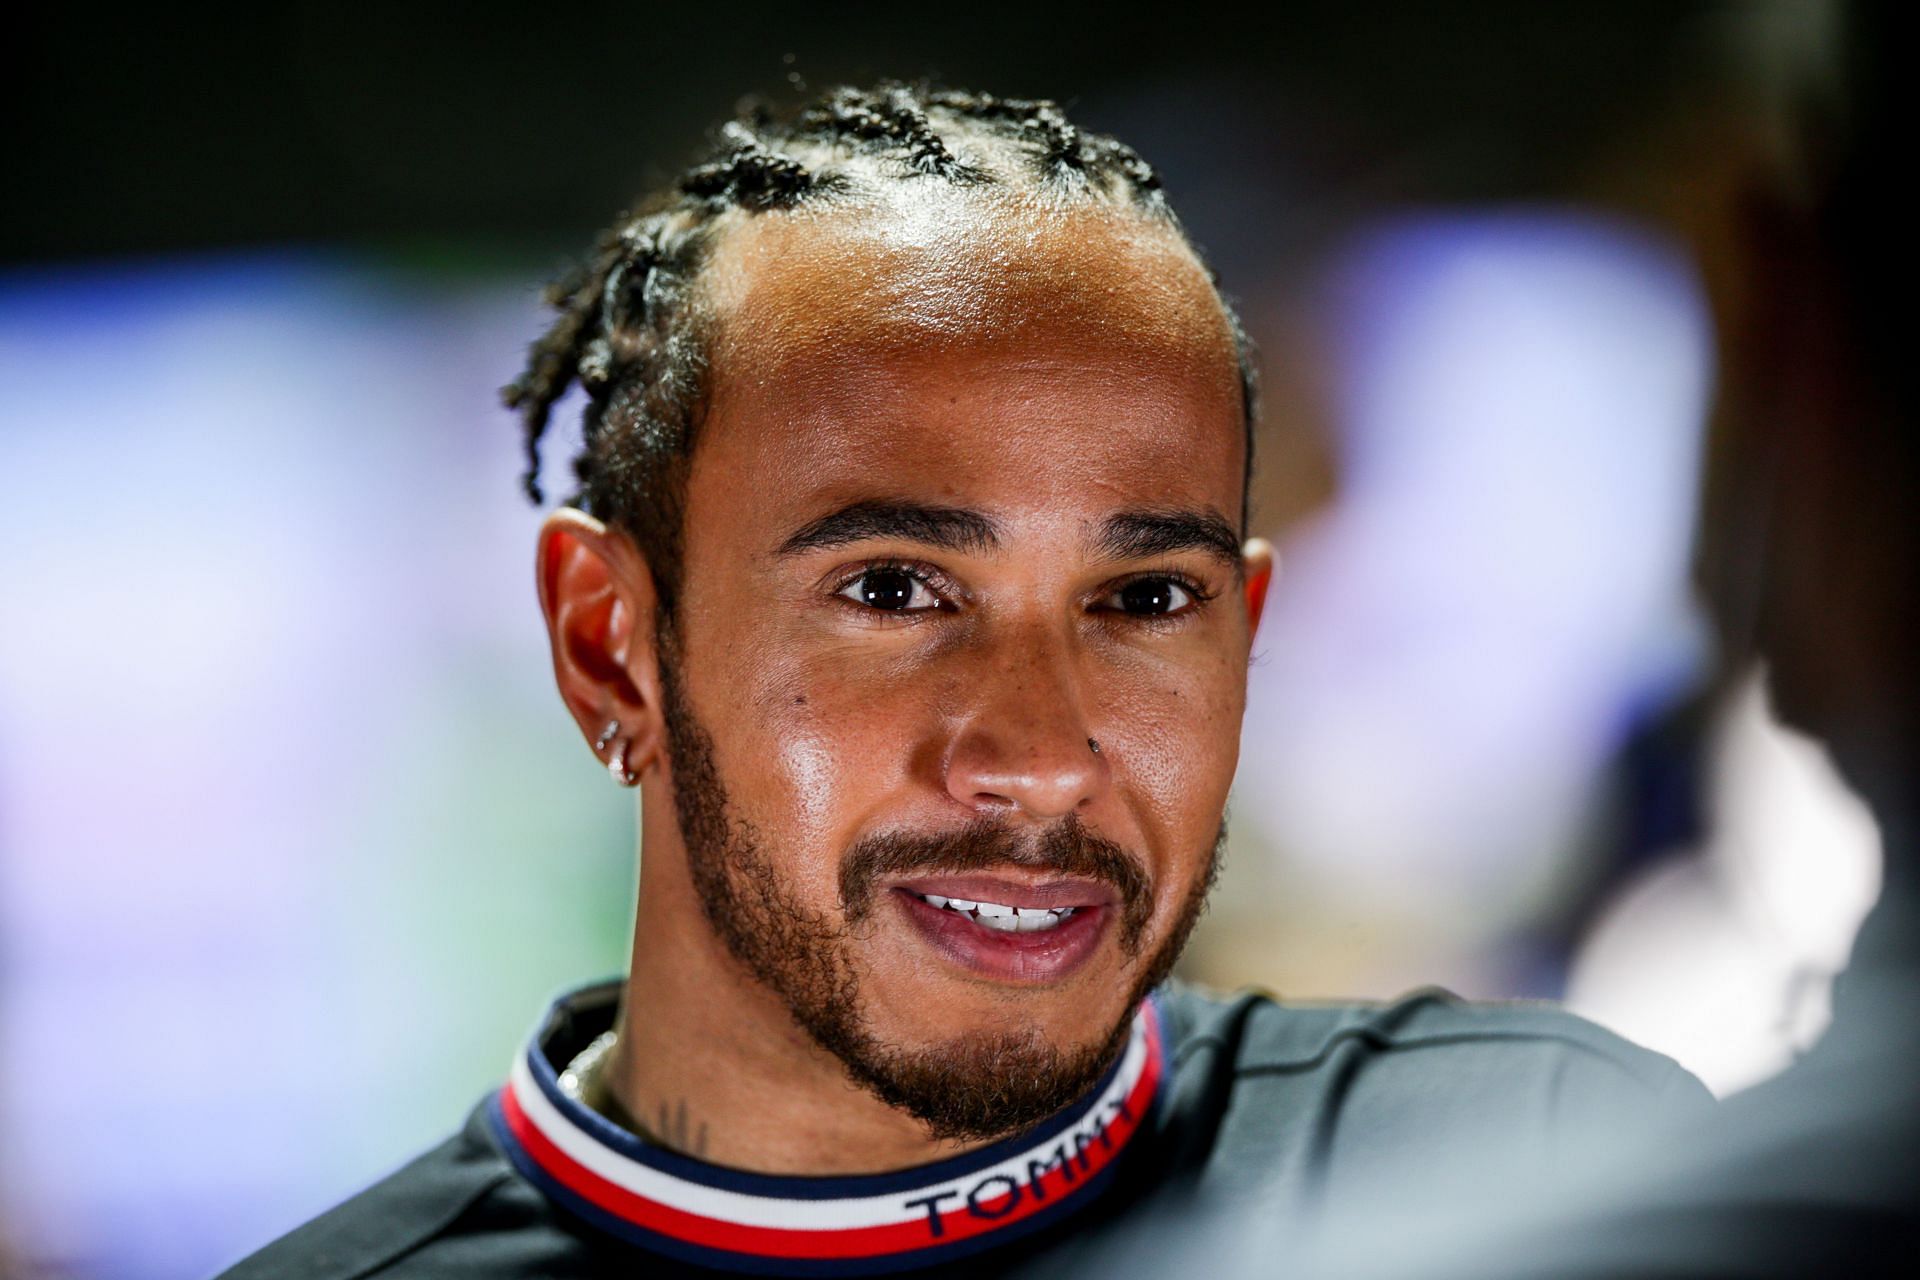 Lewis Hamilton previews ahead of the 2021 Saudi Arabia Grand Prix. (Photo by Peter Fox/Getty Images)